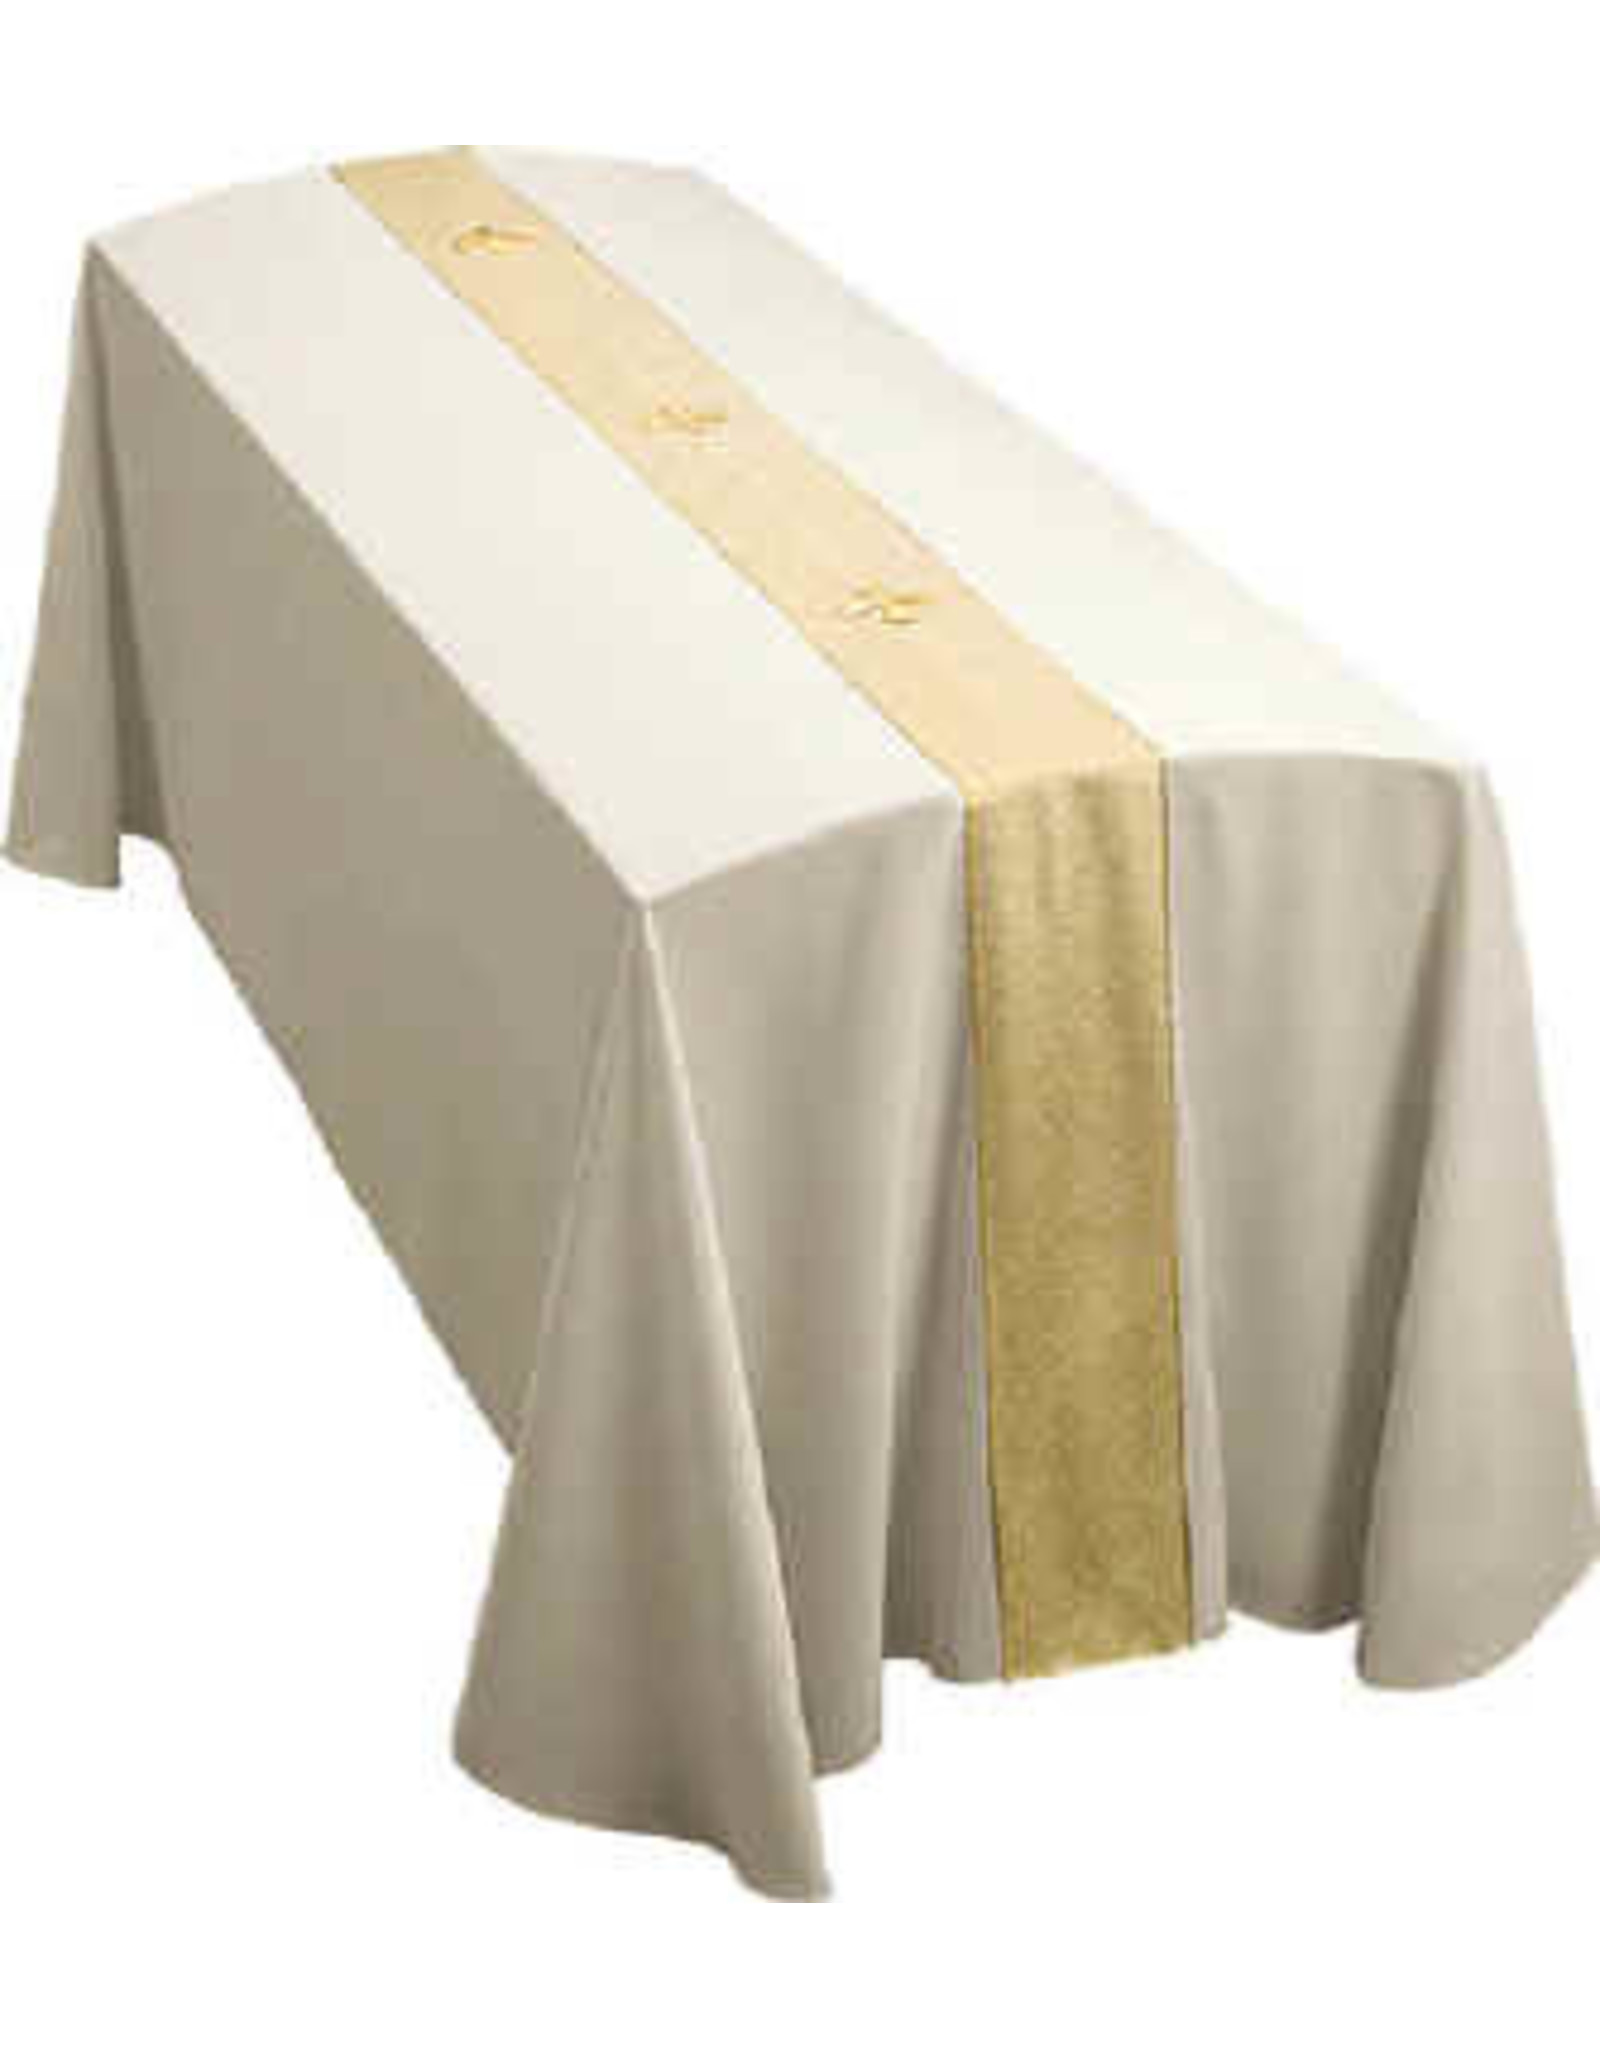 Theological Threads Funeral Pall, Cream/Gold